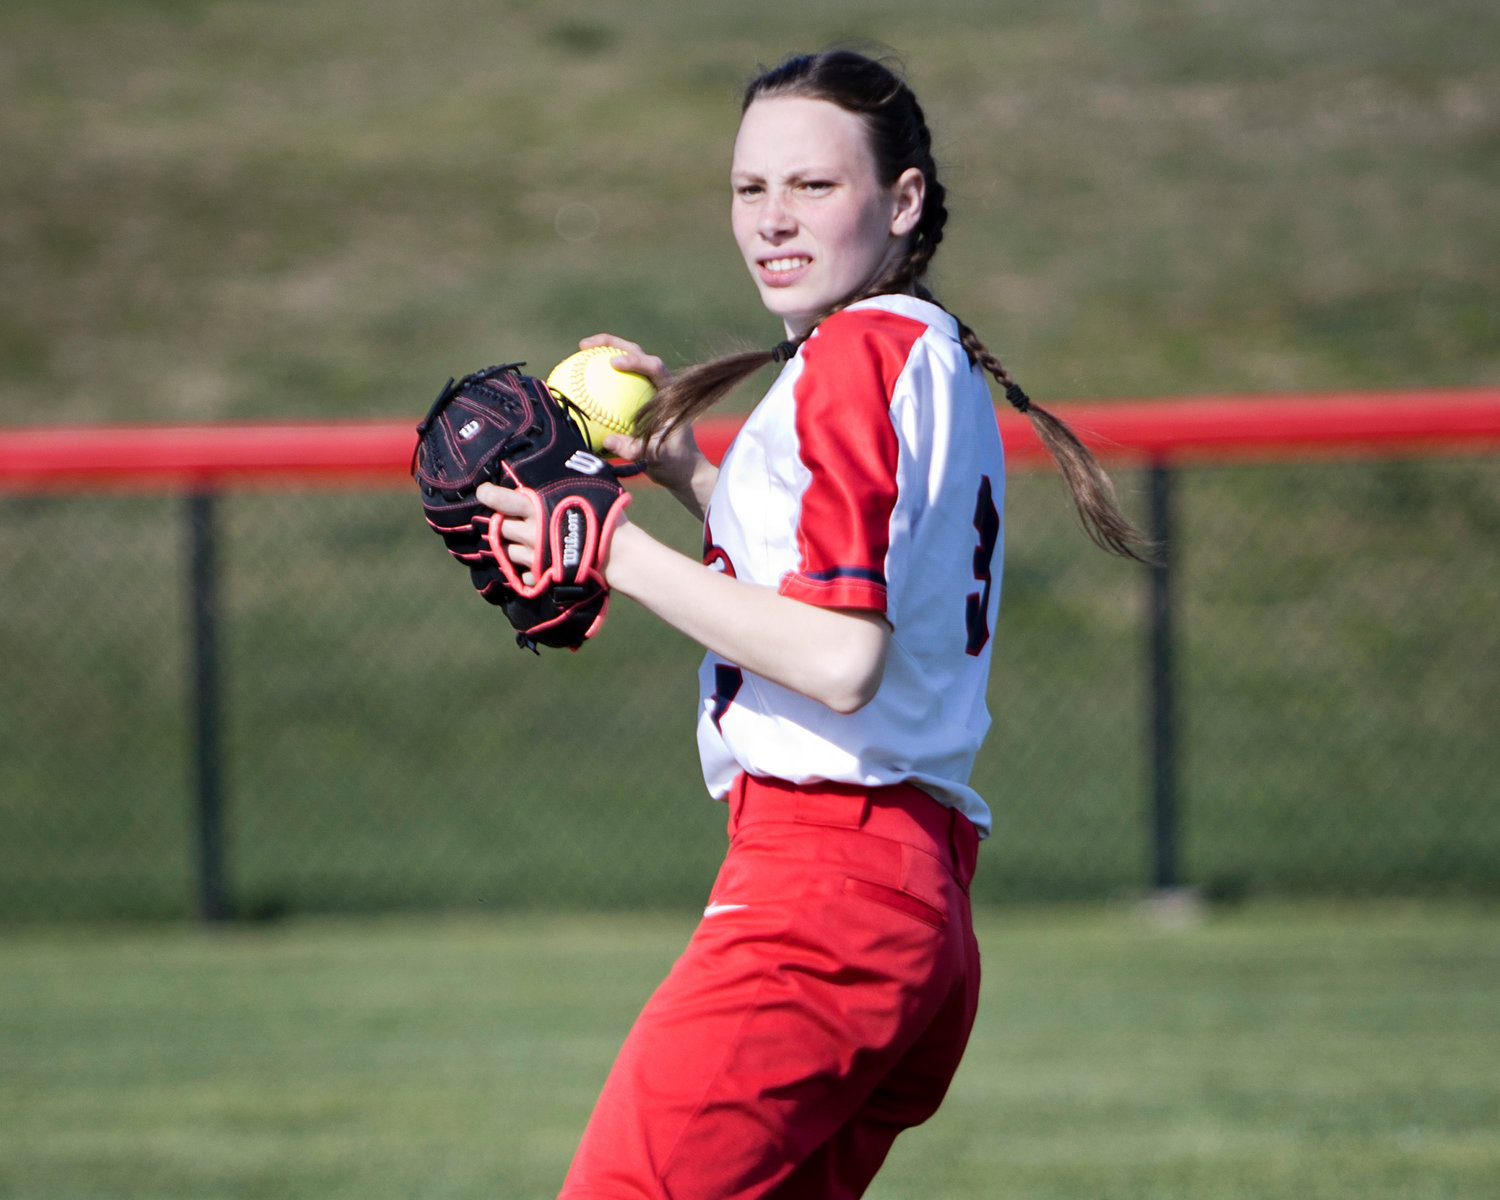 Karina Hopton throws the ball in from right field.